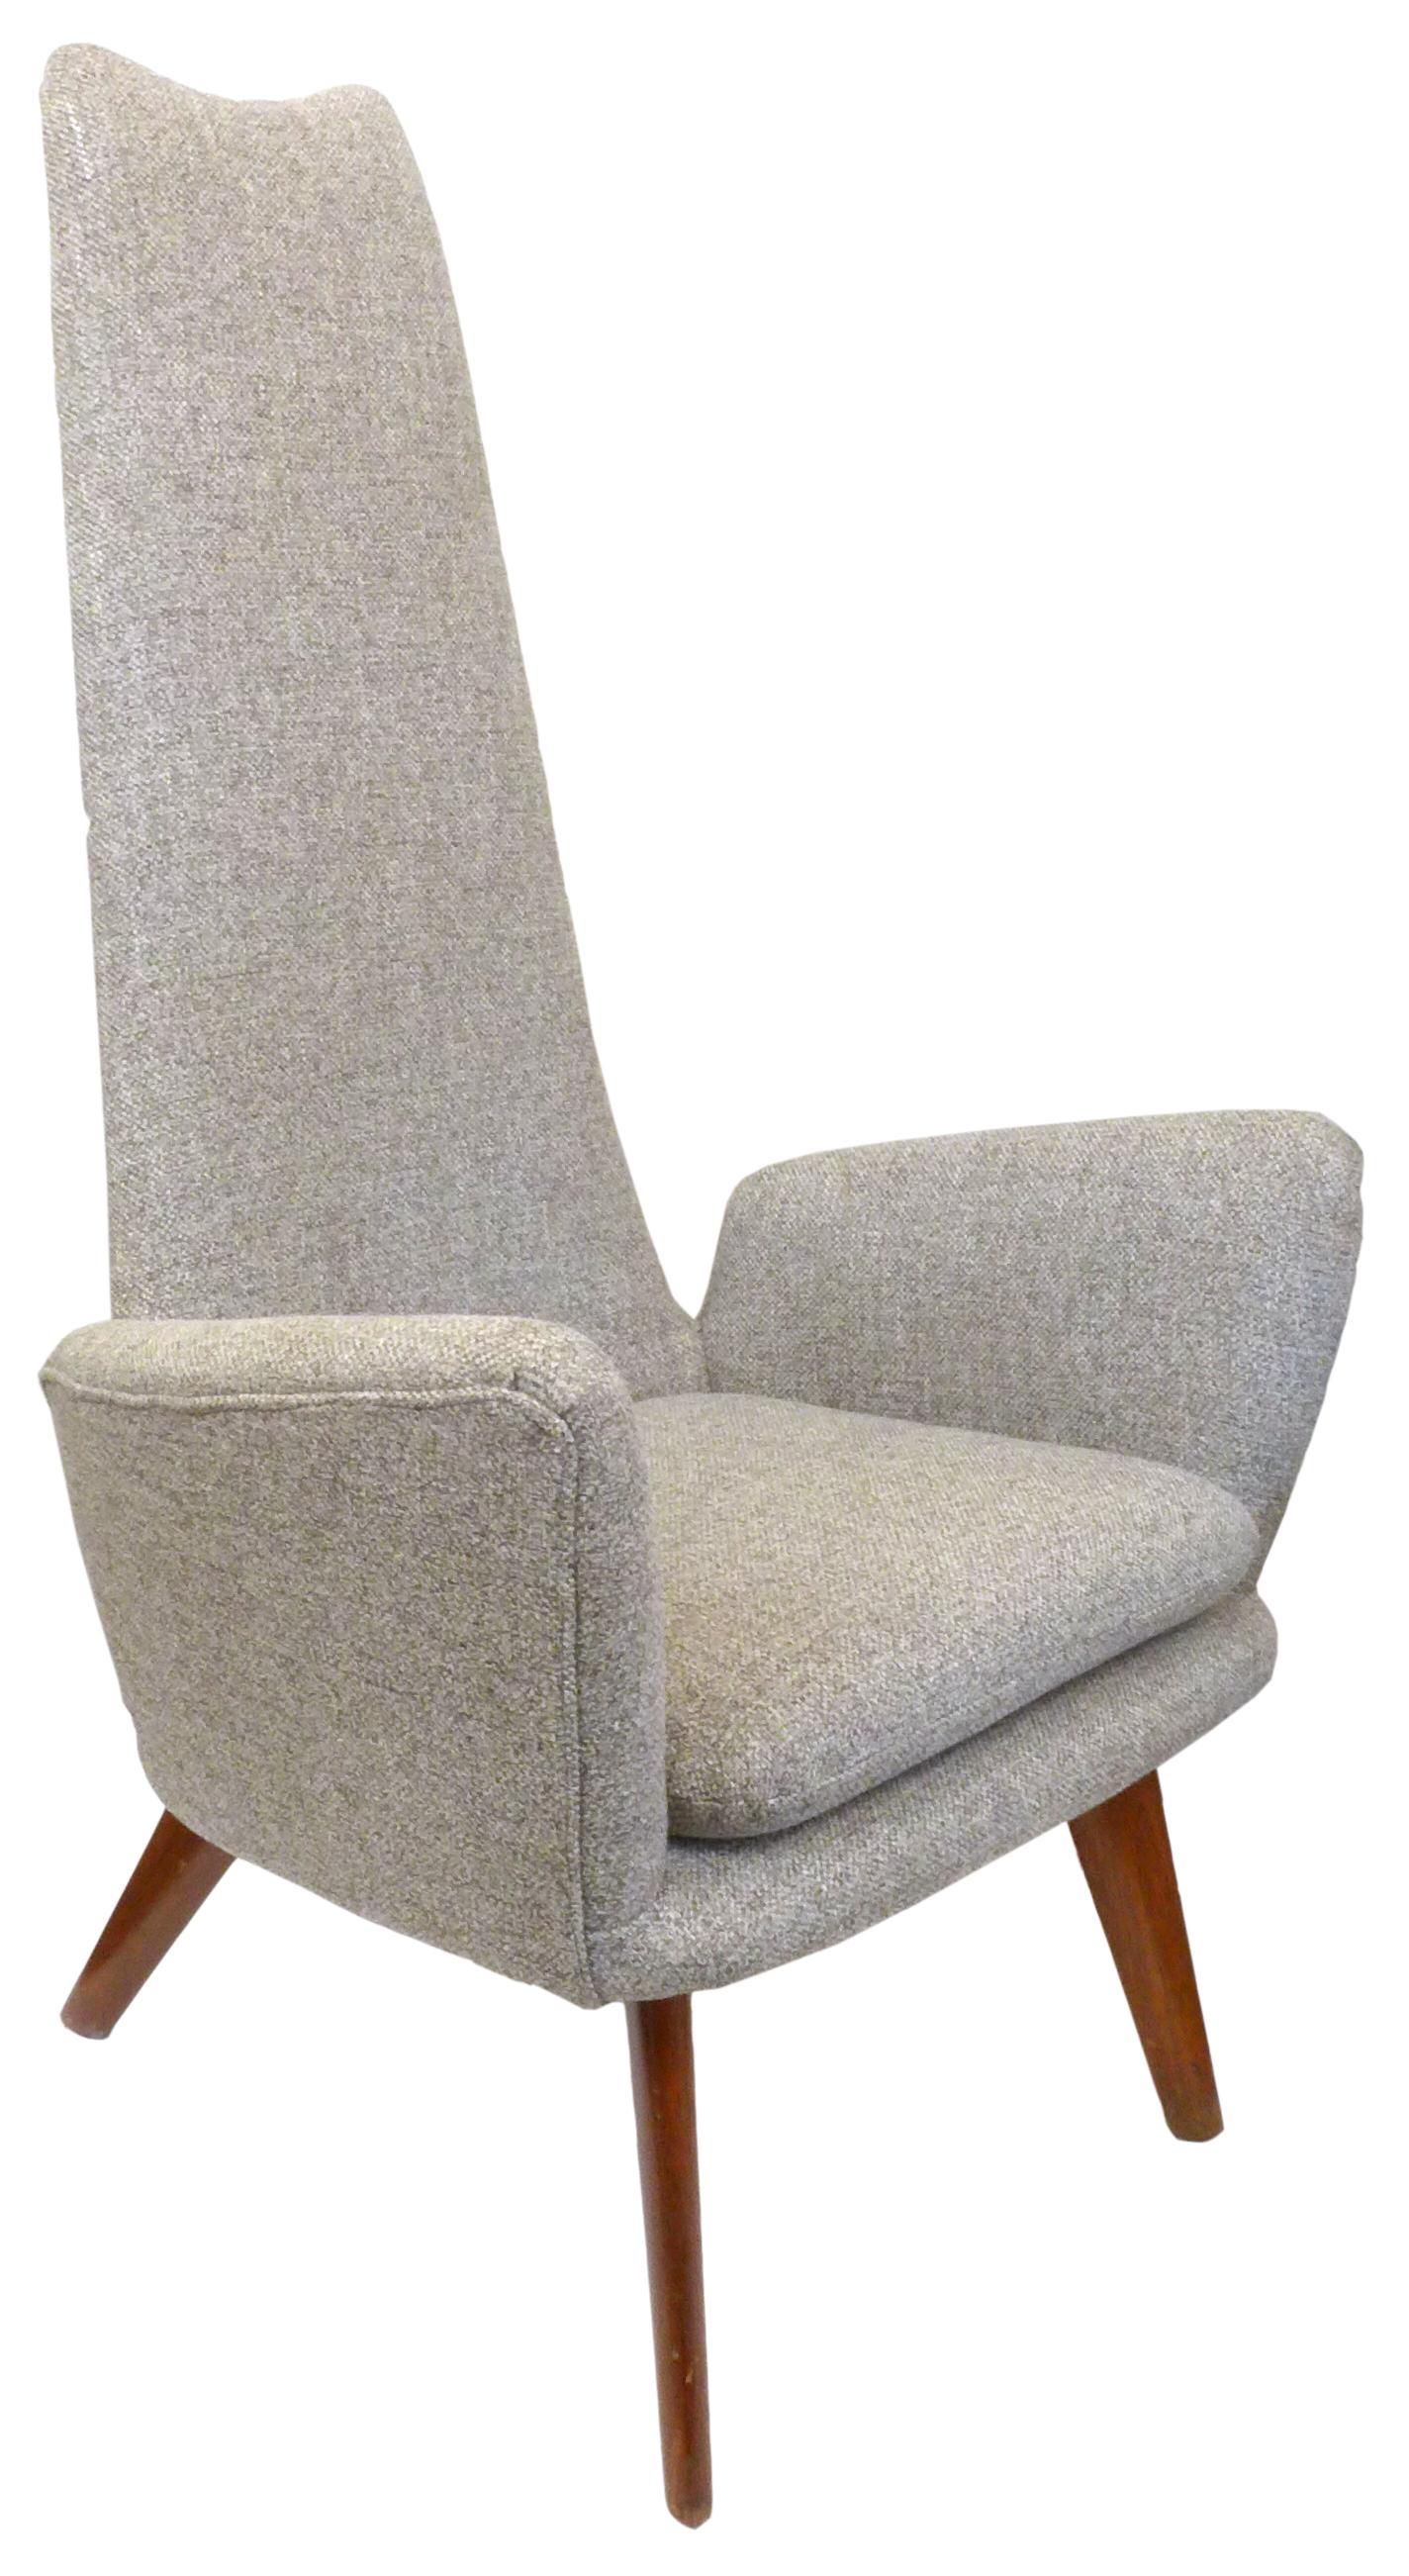 A handsome pair of Mid-Century Modern high-back lounge chairs. Sleek and stylish with expressive, angular lines throughout; an eye-catching silhouette. Great sculptural presence and proportions. Upholstered in a high-quality contemporary textured